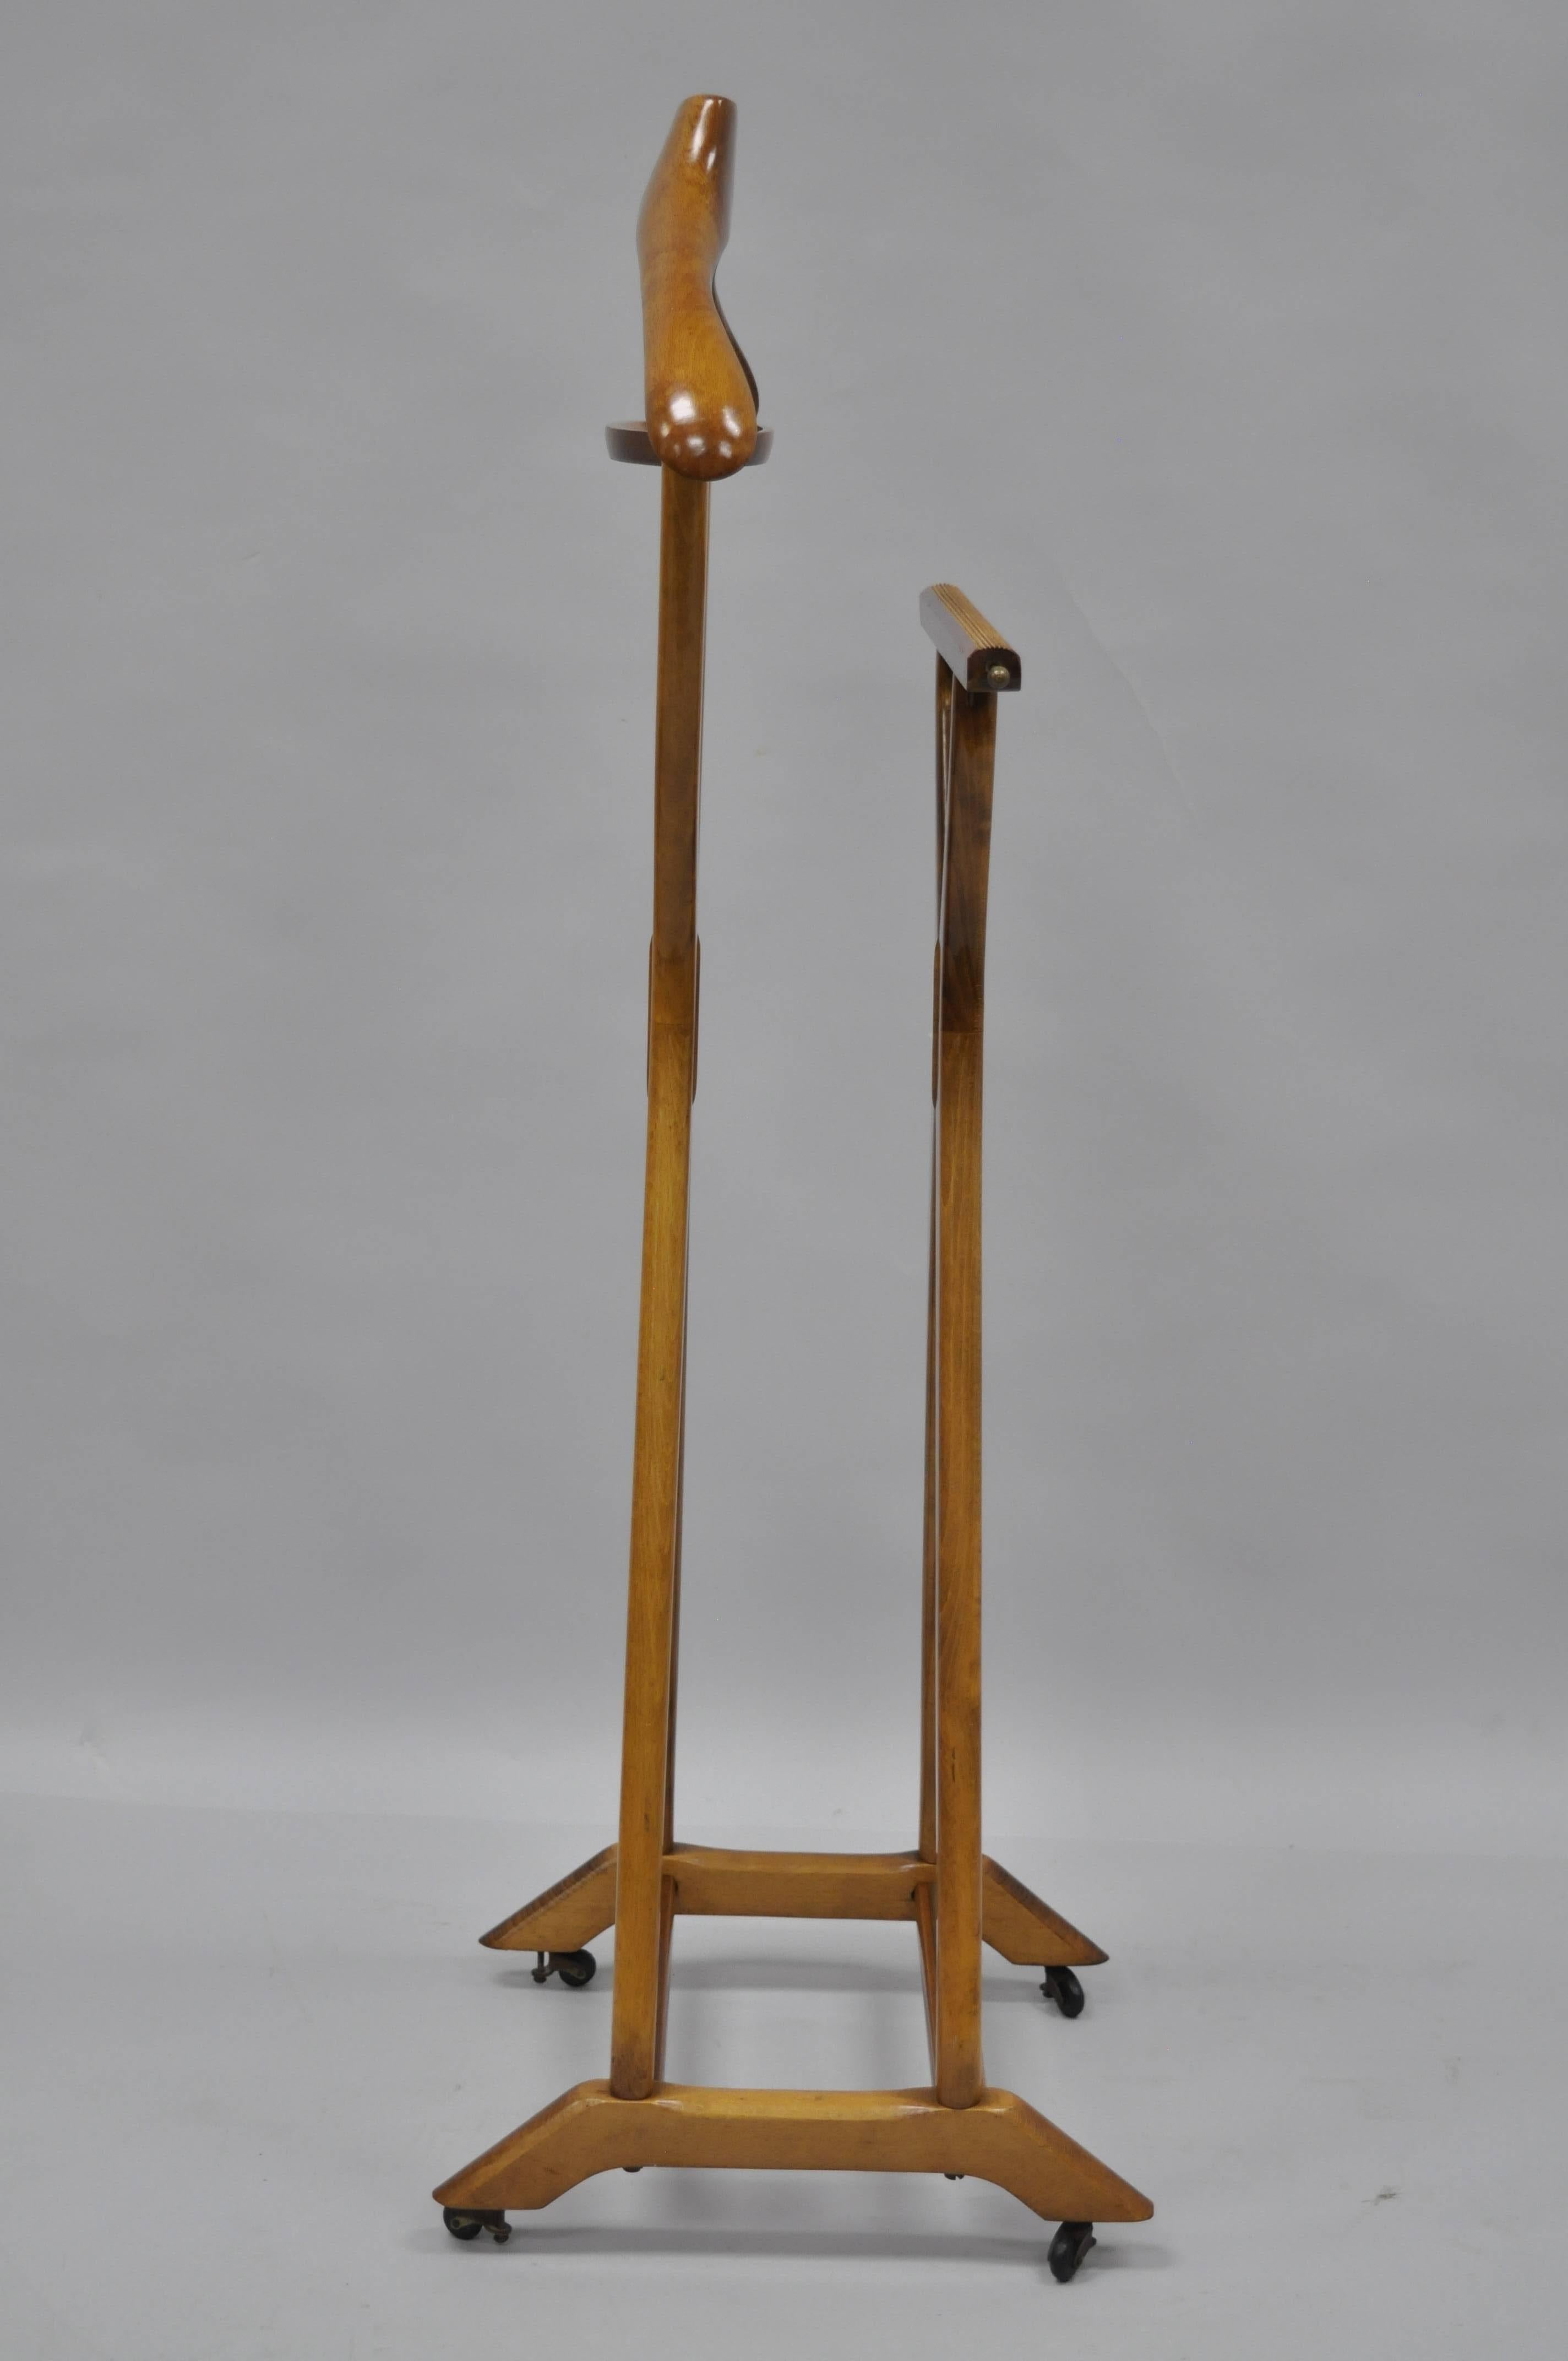 Vintage Italian Modernist X-Form Clothes Valet Stand designed by Ico Parisi, Made in Italy by Fratelli Reguitti. This Mid Century Modern Item features a solid wood frame, double stand (one for pants and one for suit jacket), change dish, shoe rest,